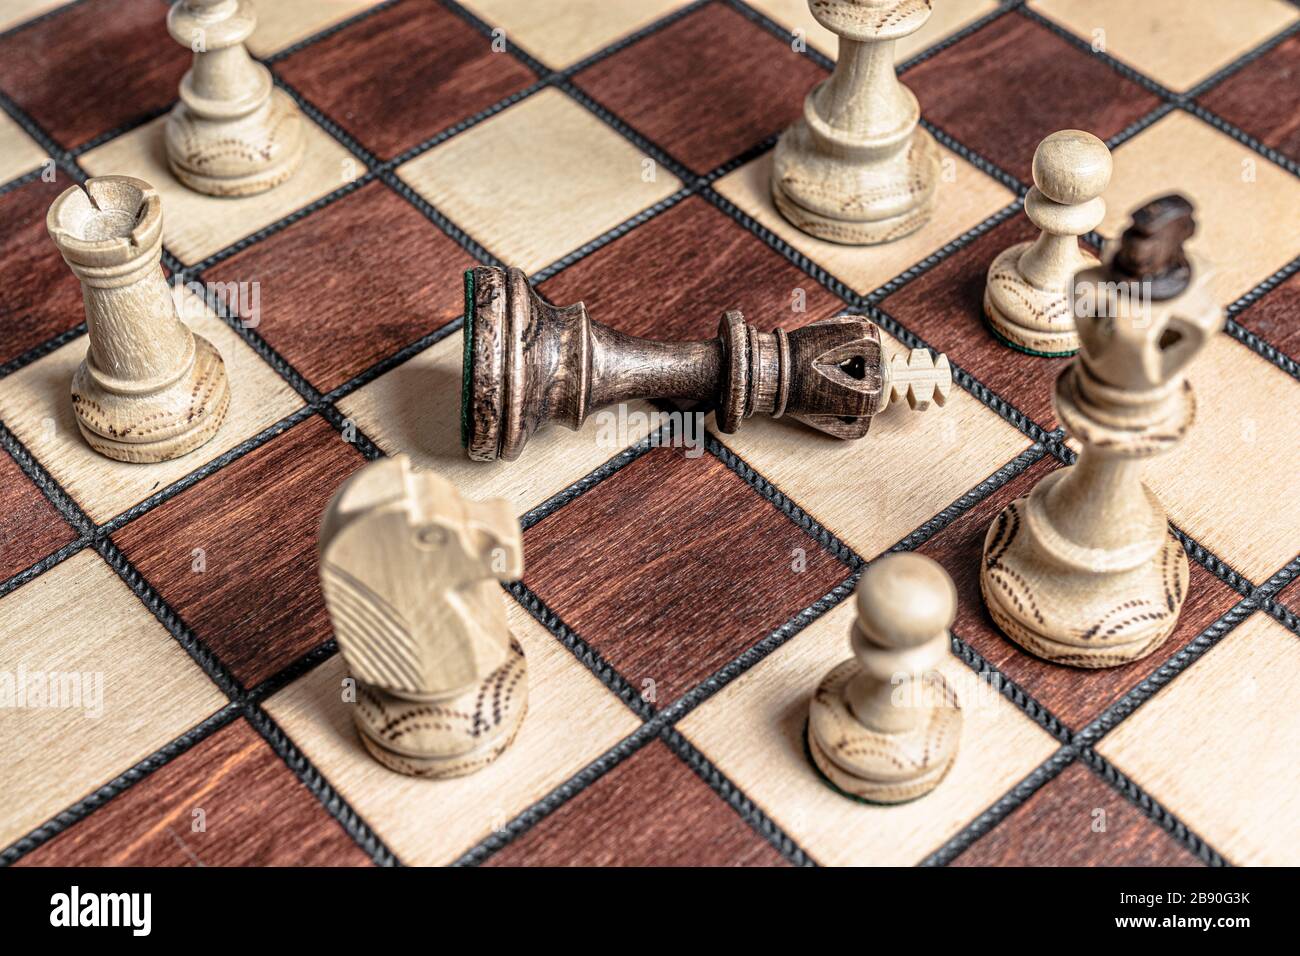 Chess board with black king surrendered to overwhelming force of white chess pieces. Royalty free stock photo. Stock Photo